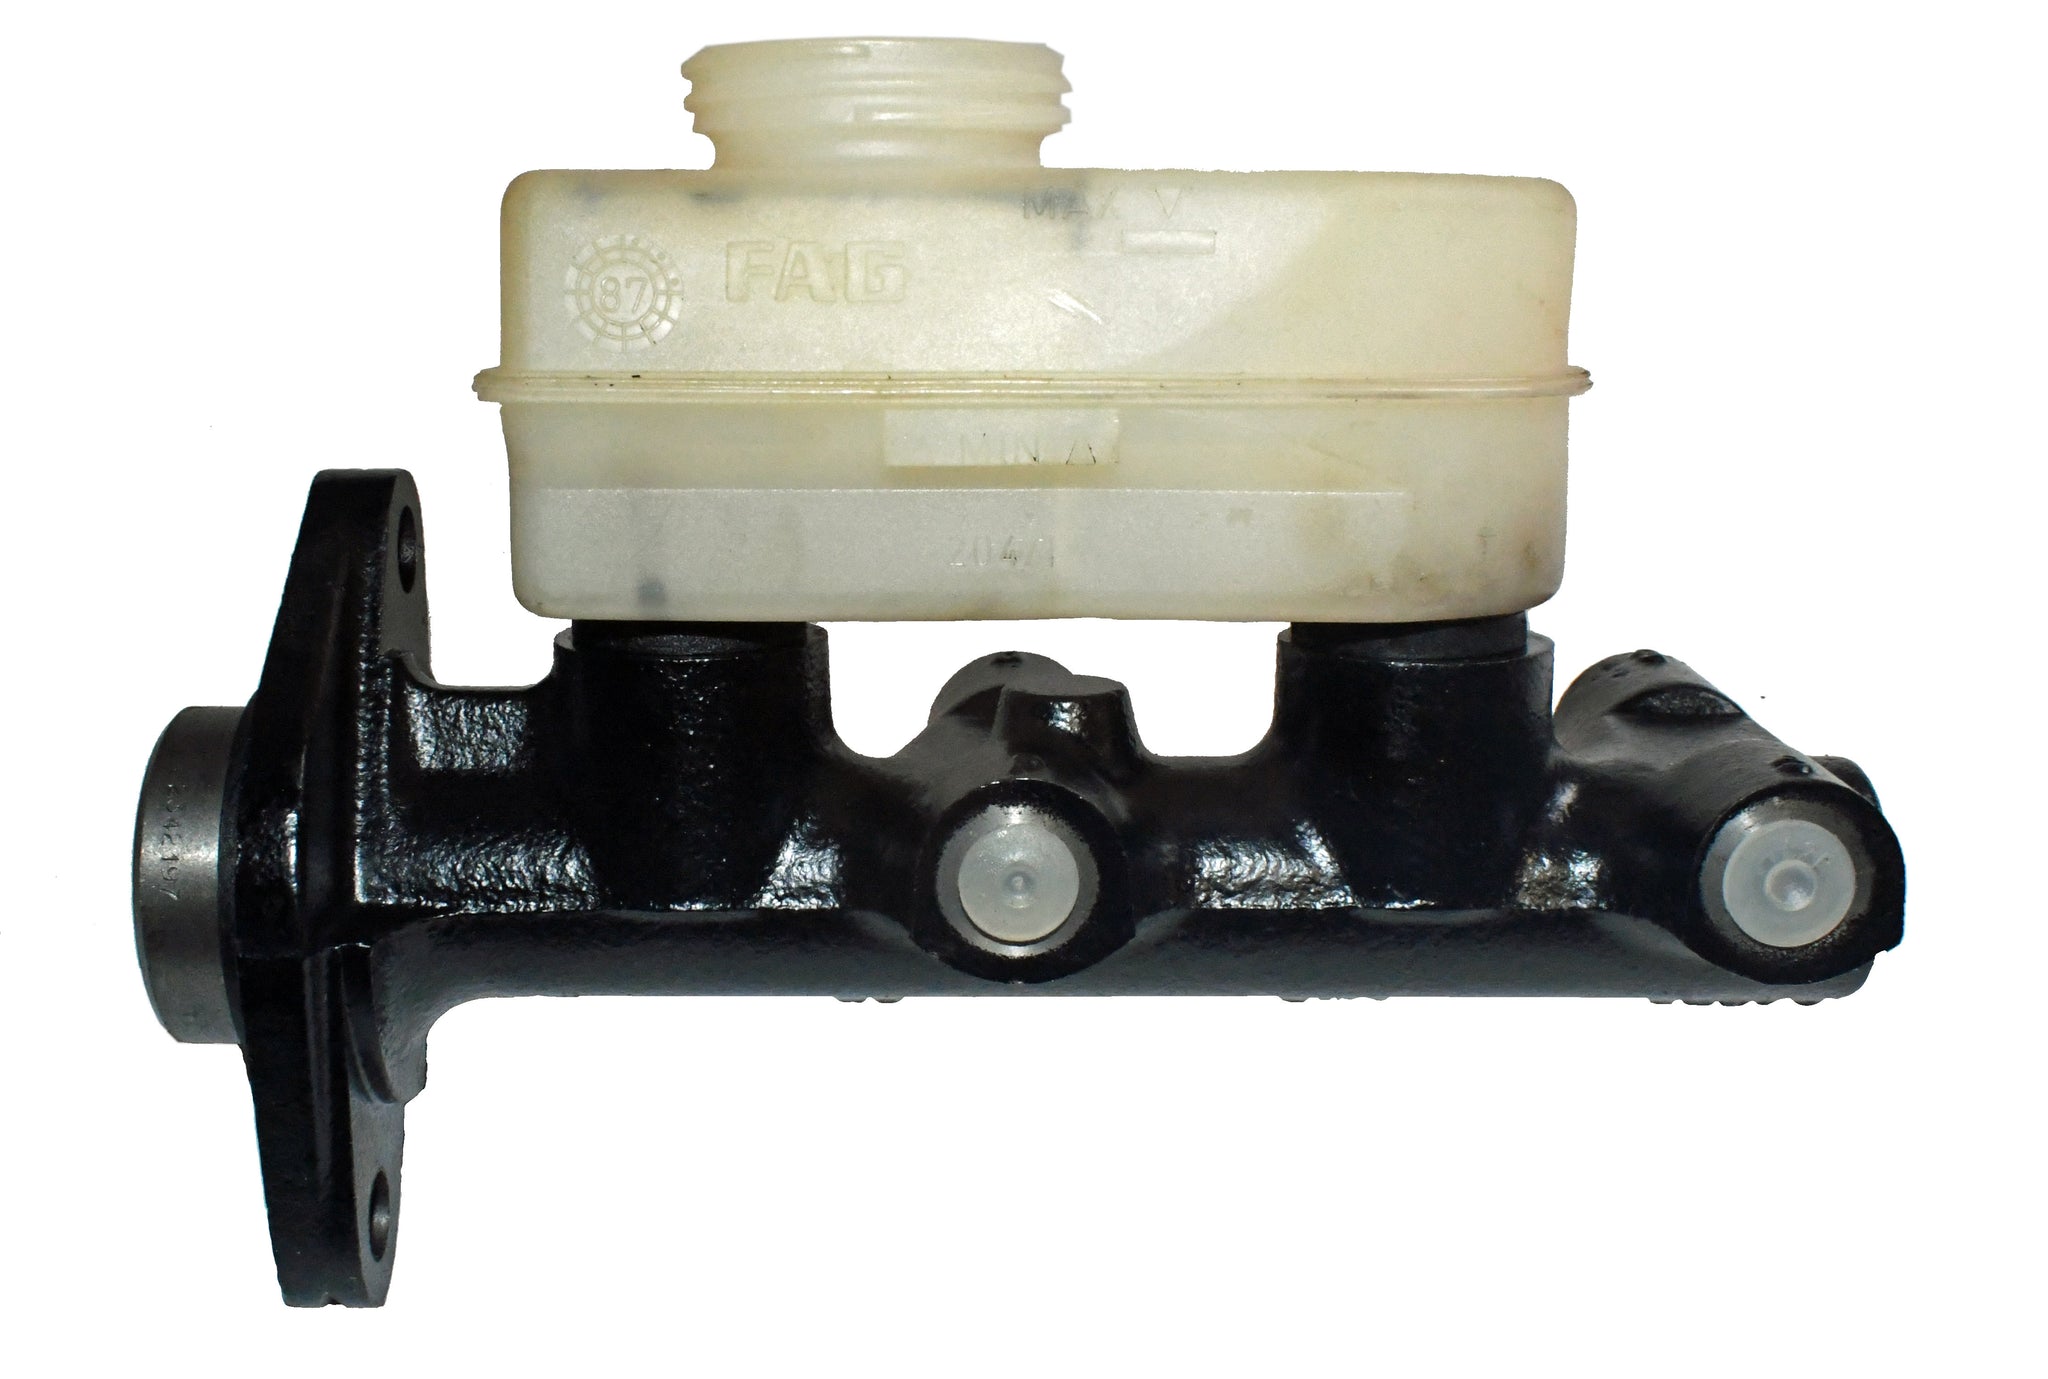 New brake master cylinder for 1978-1980 Ford Fiesta MC39036